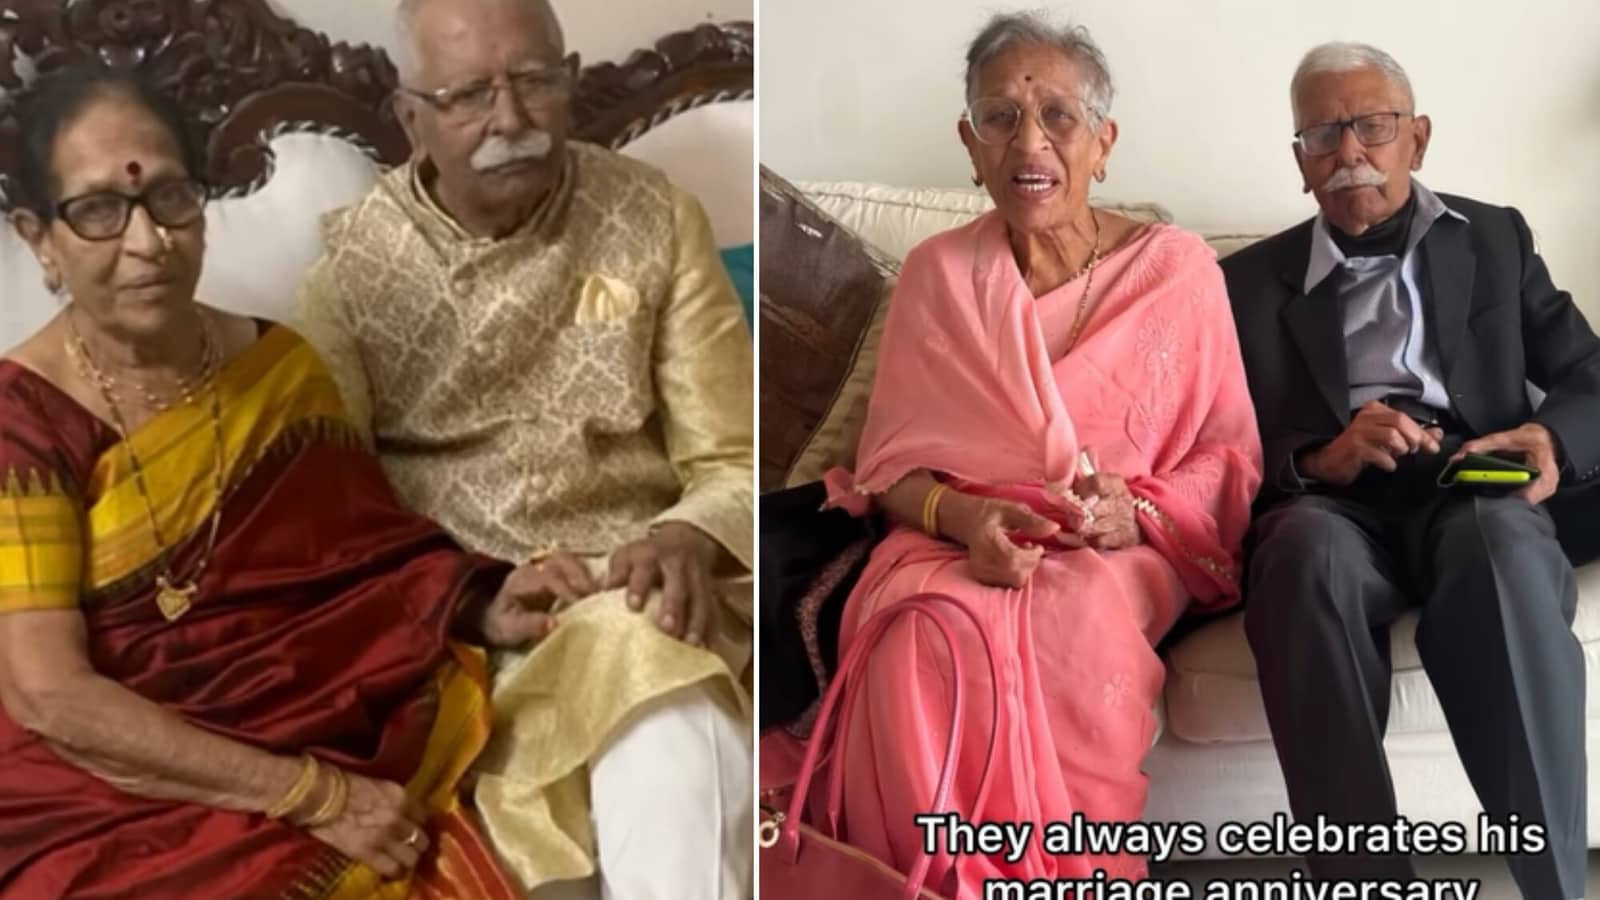 Elderly man reunites with his wife who was hospitalised for 30 days, his reaction makes people say 'That's true love'